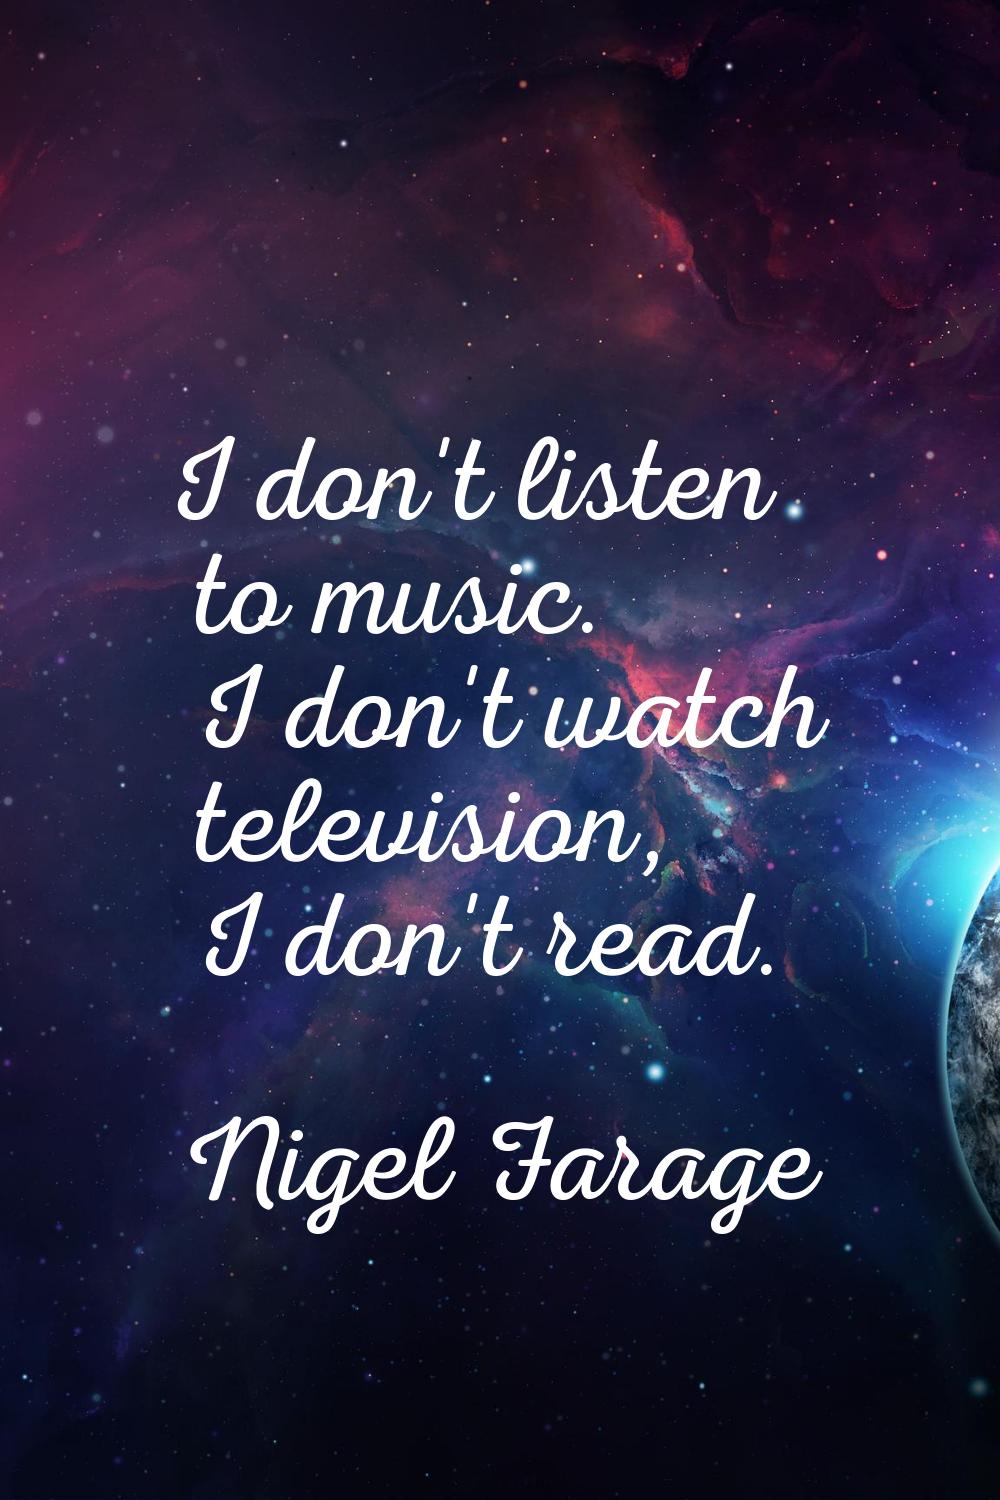 I don't listen to music. I don't watch television, I don't read.